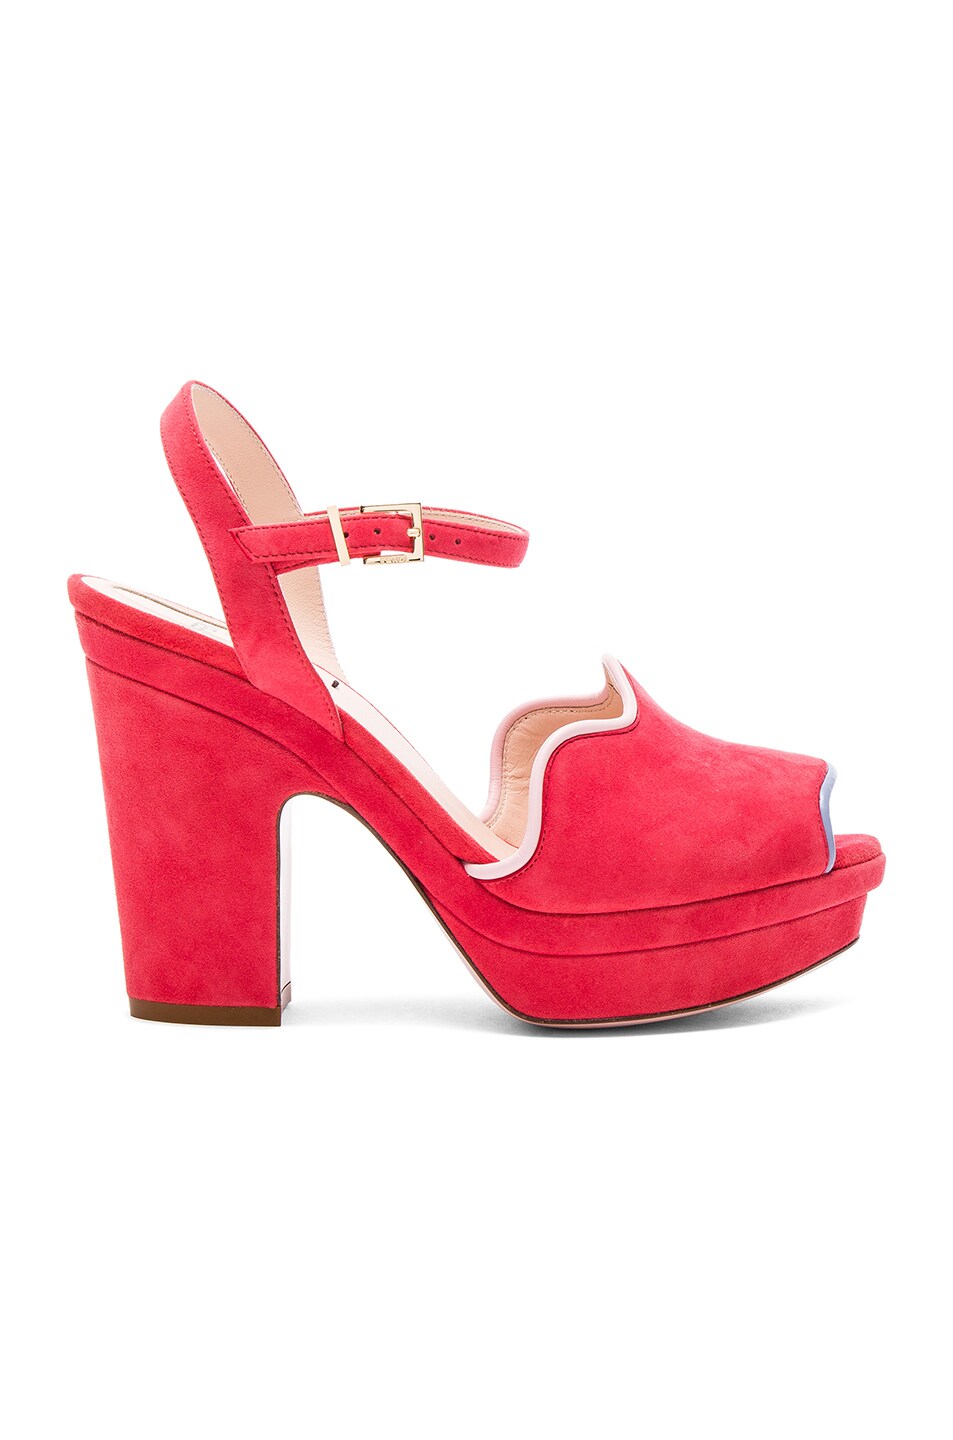 Image 1 of Fendi Suede Ankle Strap Heels in Red Waves